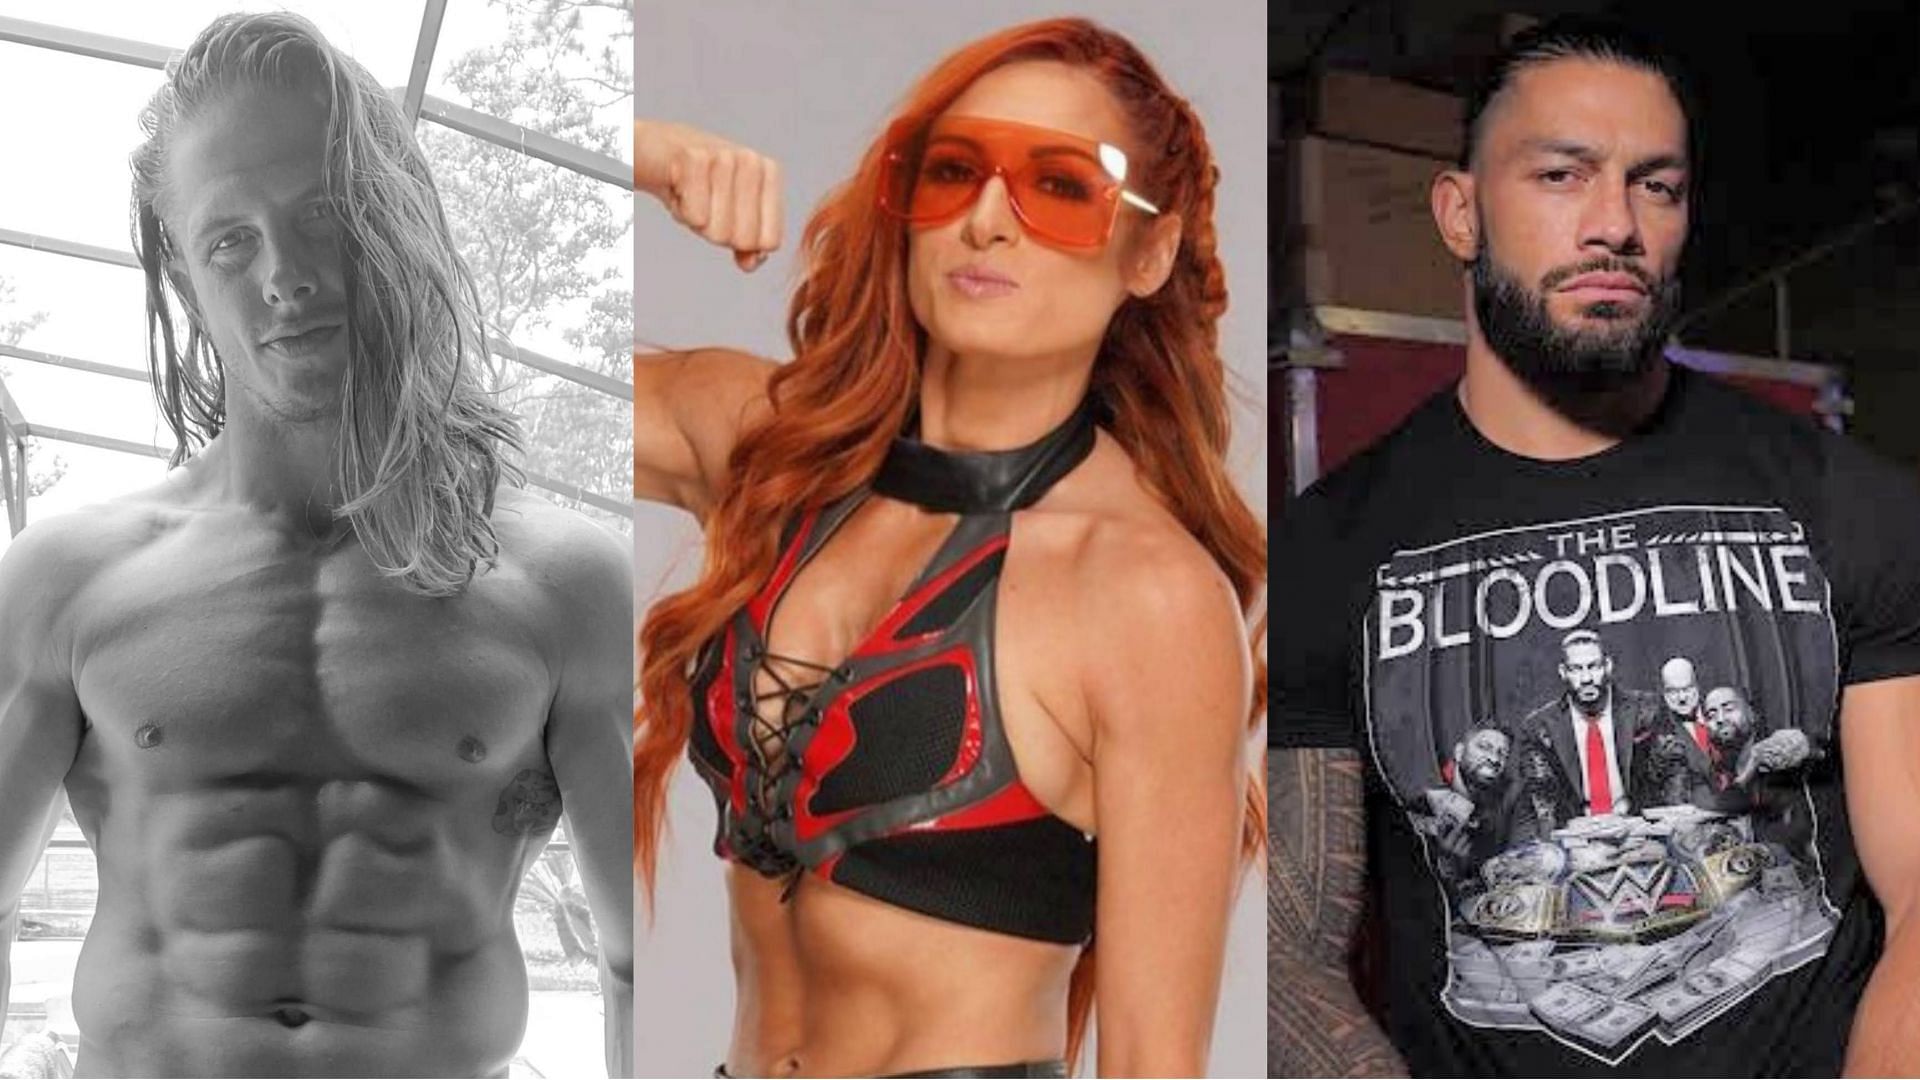 Riddle (left), Becky Lynch (middle), and Roman Reigns (right)